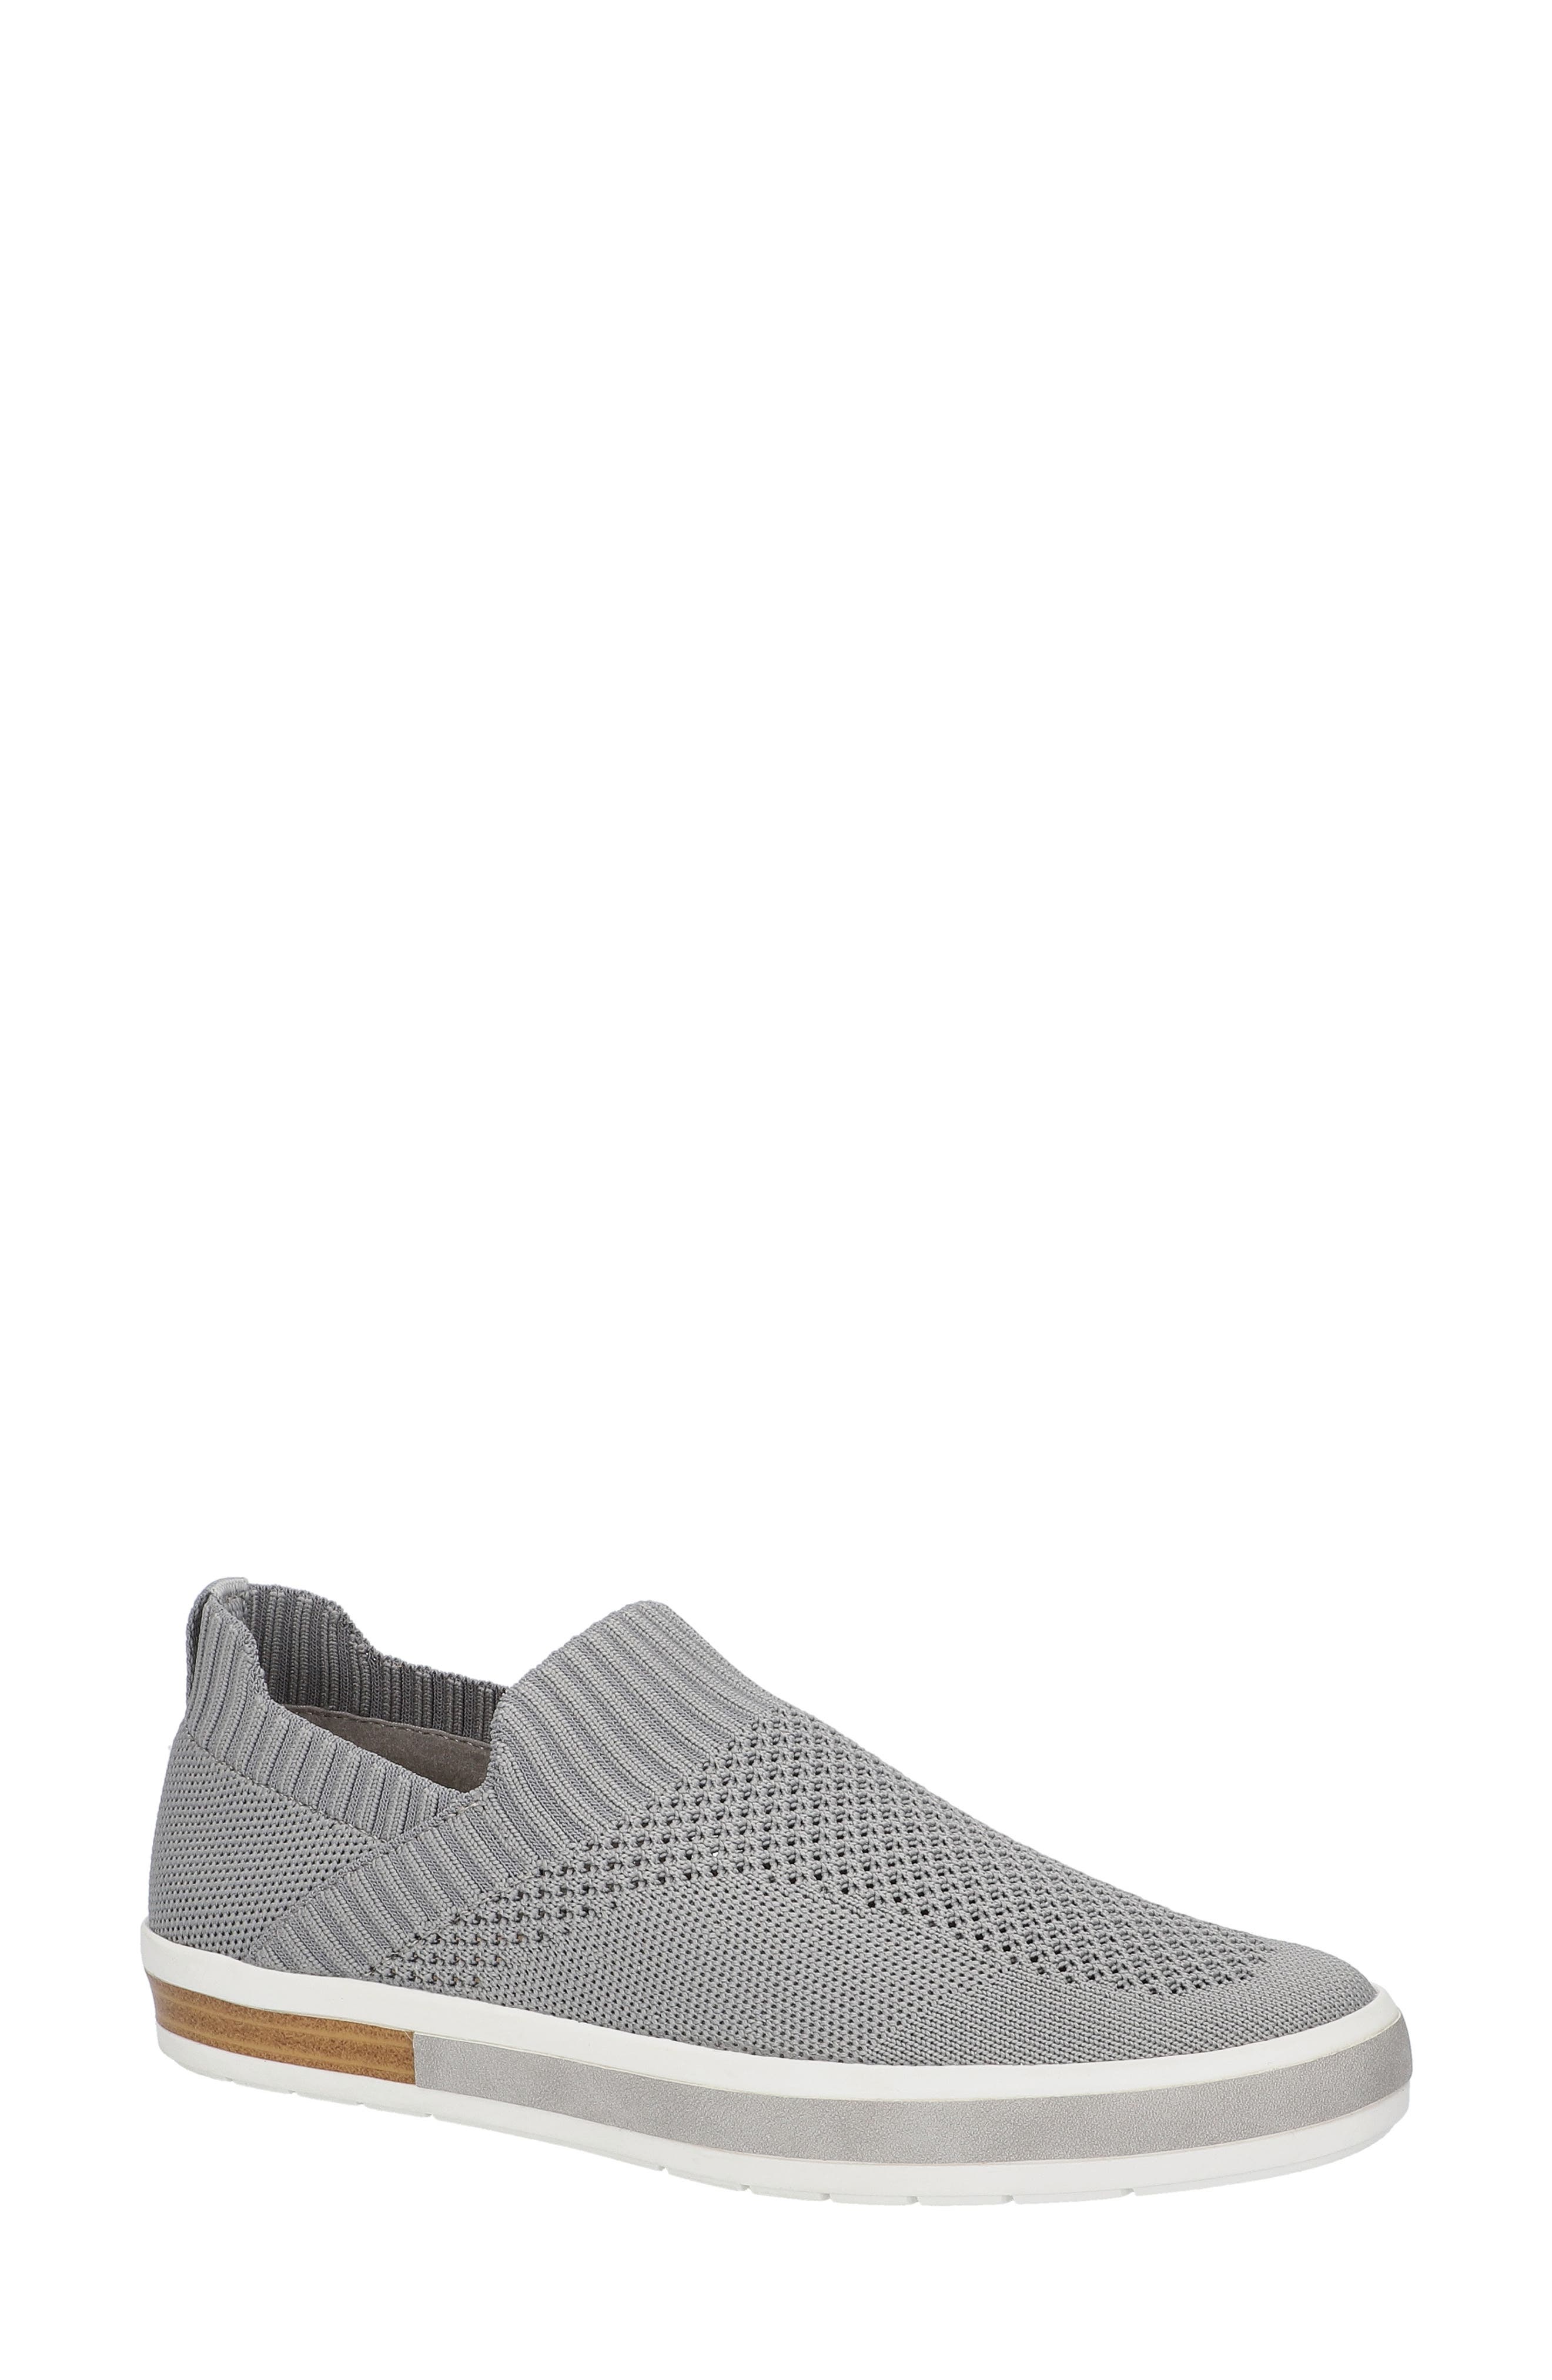 Shoes Sneakers Slip-on Sneakers Marc by Marc Jacobs Slip-on Sneakers themed print casual look 